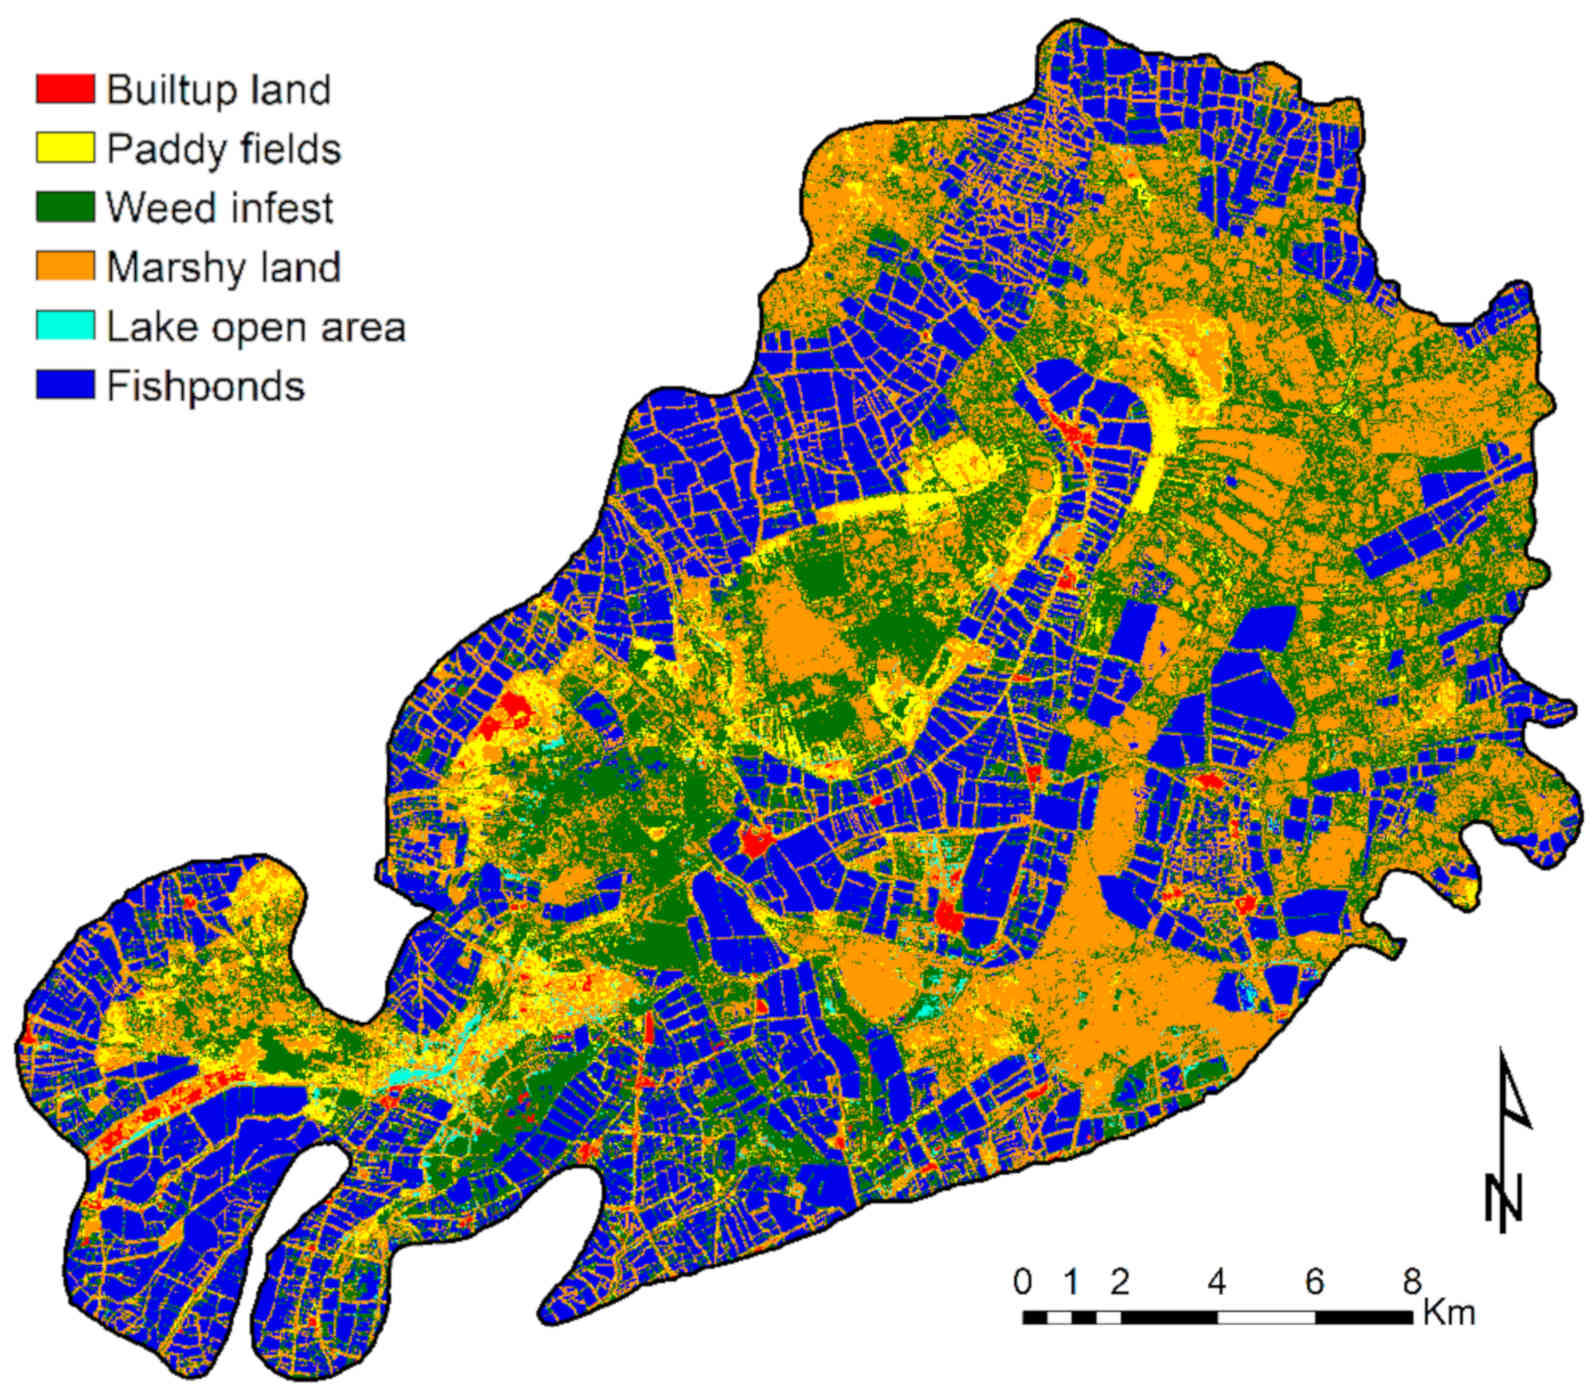 Land use map of Kolleru Lake in 2018. While the lake was a sprawling body of water until the 1980s, geography researcher Meena Kumari Kolli says now open water is only seen during the monsoon season. Visual: Kolli et. al / Water, 2020